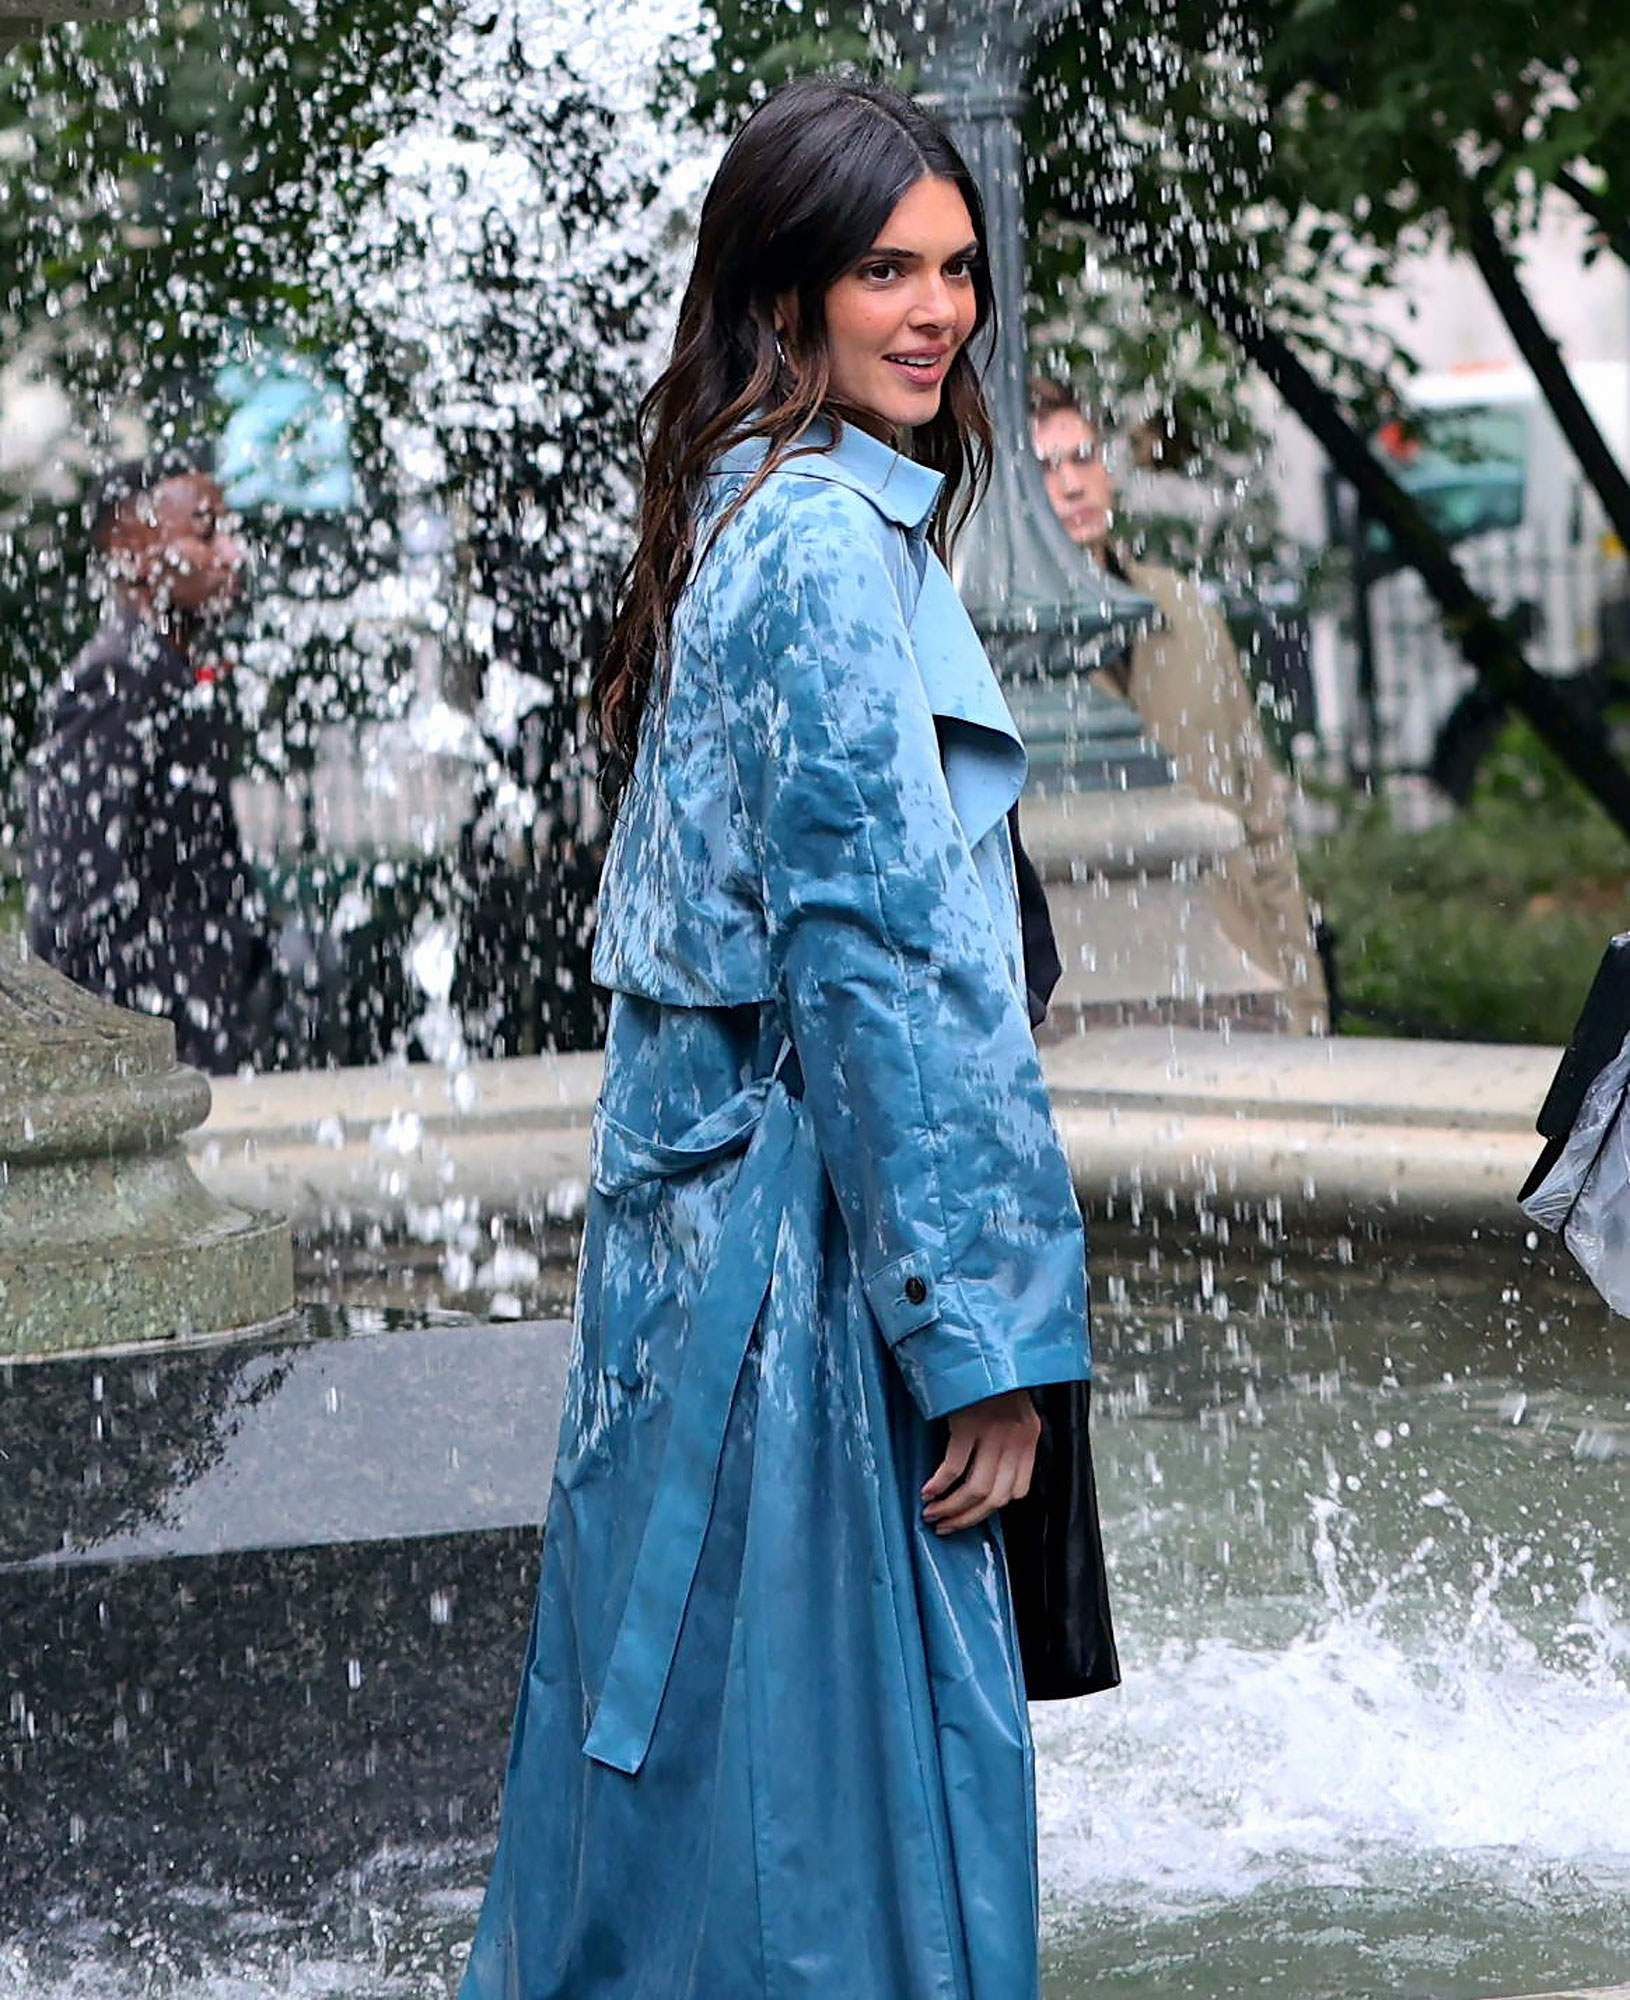 Kendall Jenner Jumps in Fountain Fully Dressed for Calvin Klein Ad